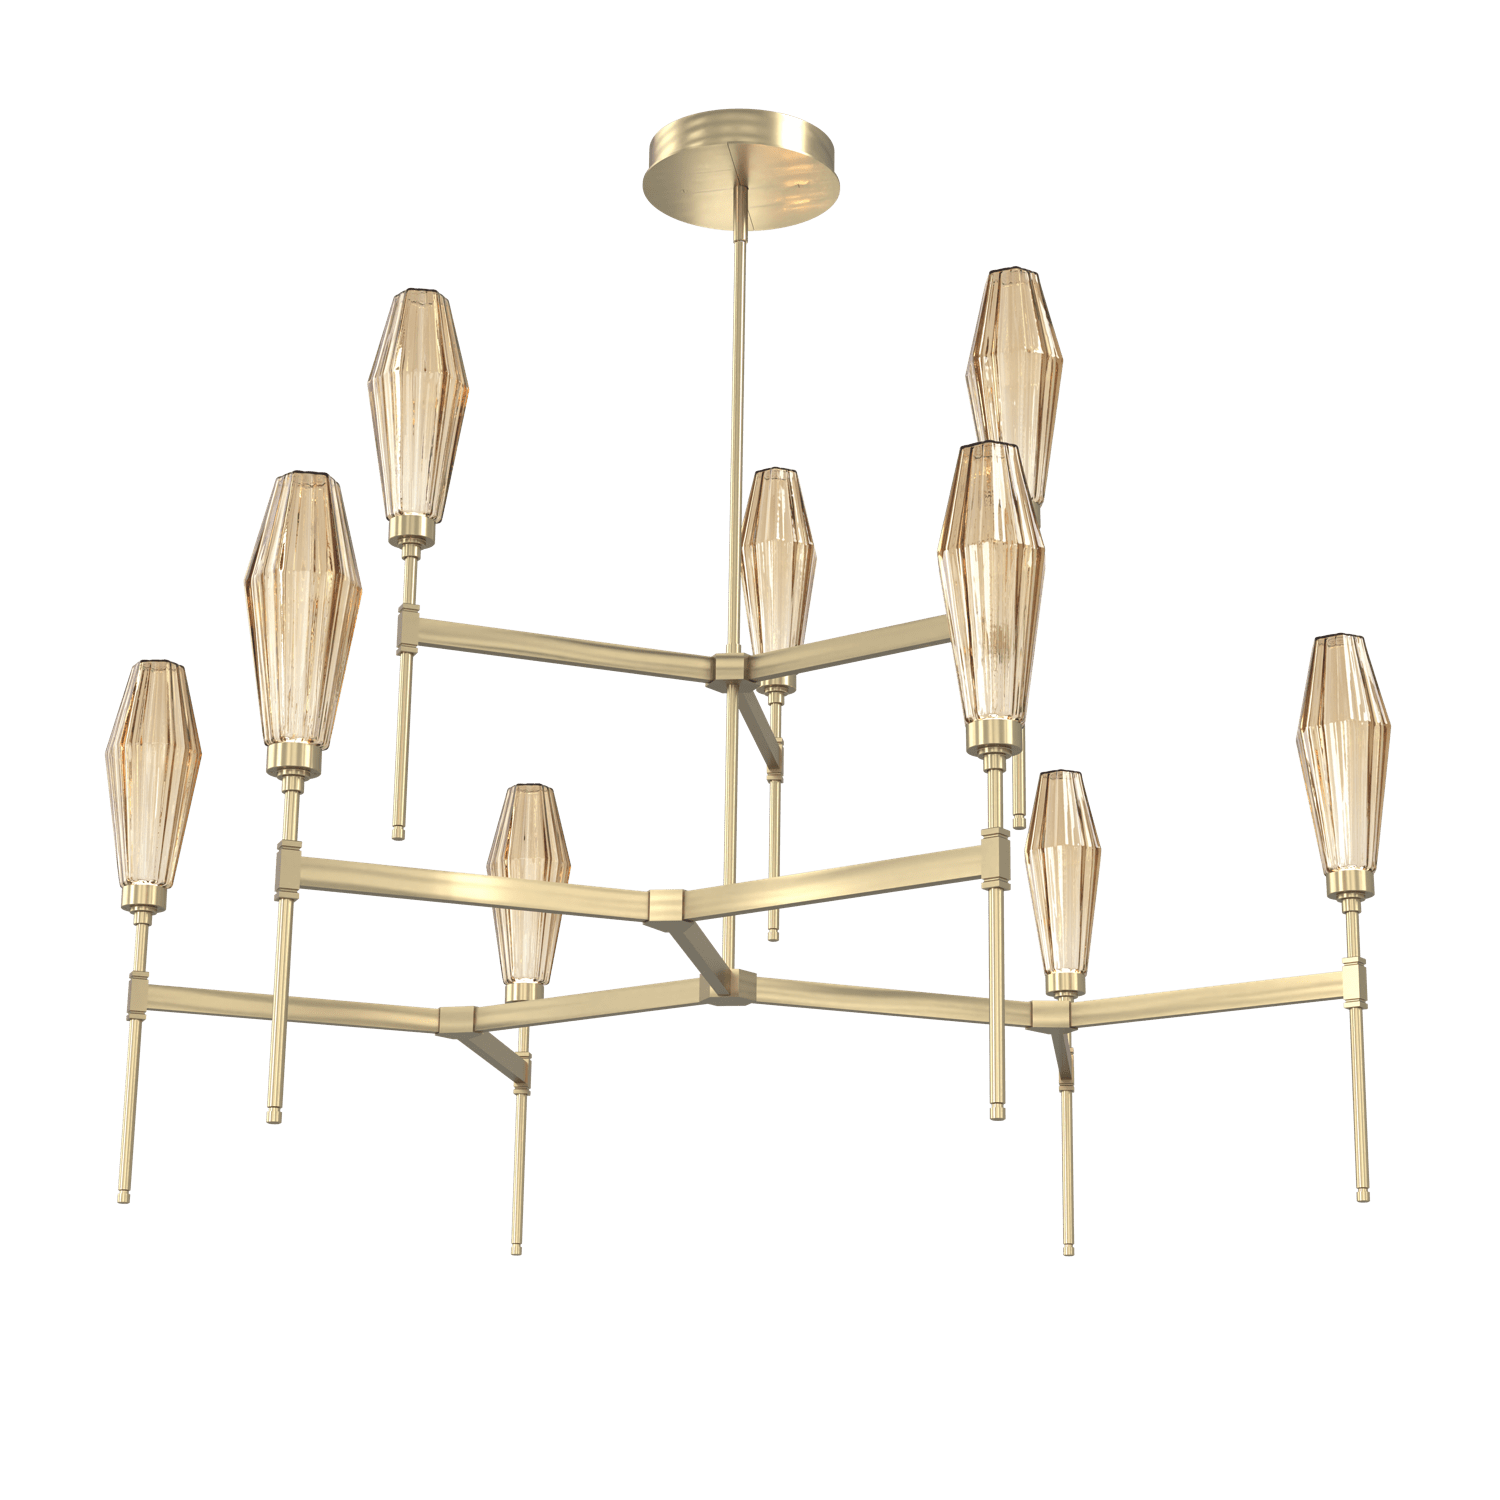 CHB0049-54-HB-RB-Hammerton-Studio-Aalto-54-inch-round-two-tier-belvedere-chandelier-with-heritage-brass-finish-and-optic-ribbed-bronze-glass-shades-and-LED-lamping